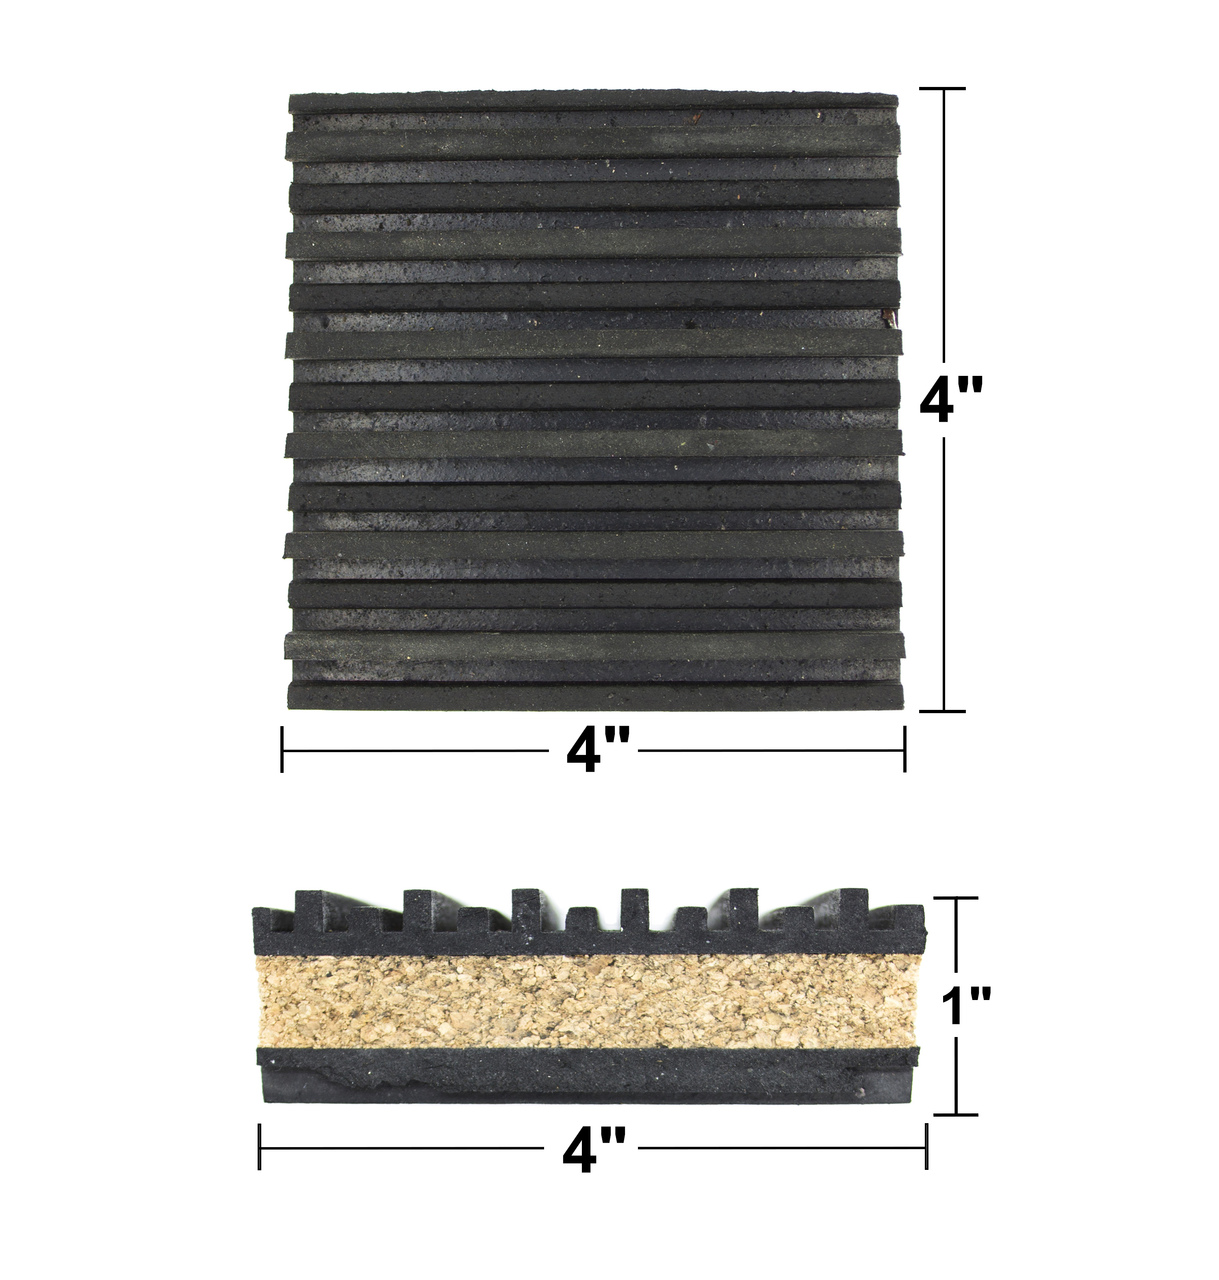 ANTI VIBRATION ISOLATION PADS 2" X 2" X 7/8" RIBBED RUBBER WITH CORK CENTER 